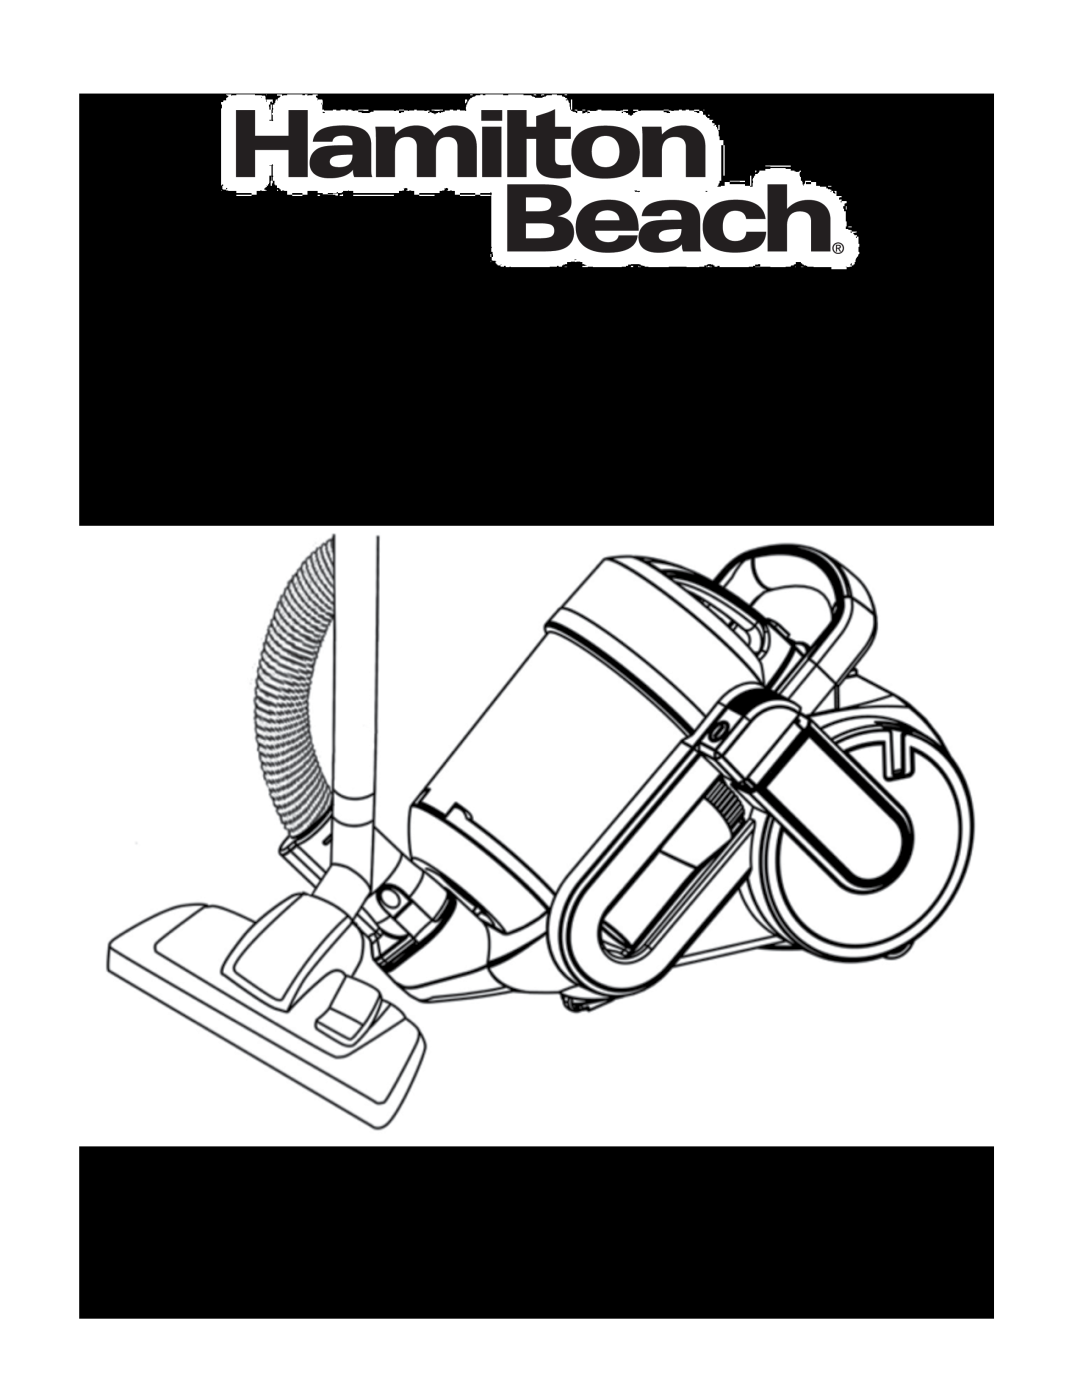 Hamilton Beach owner manual Canister Vacuum Cleaner, Model No. HB-363, Read Before Use 